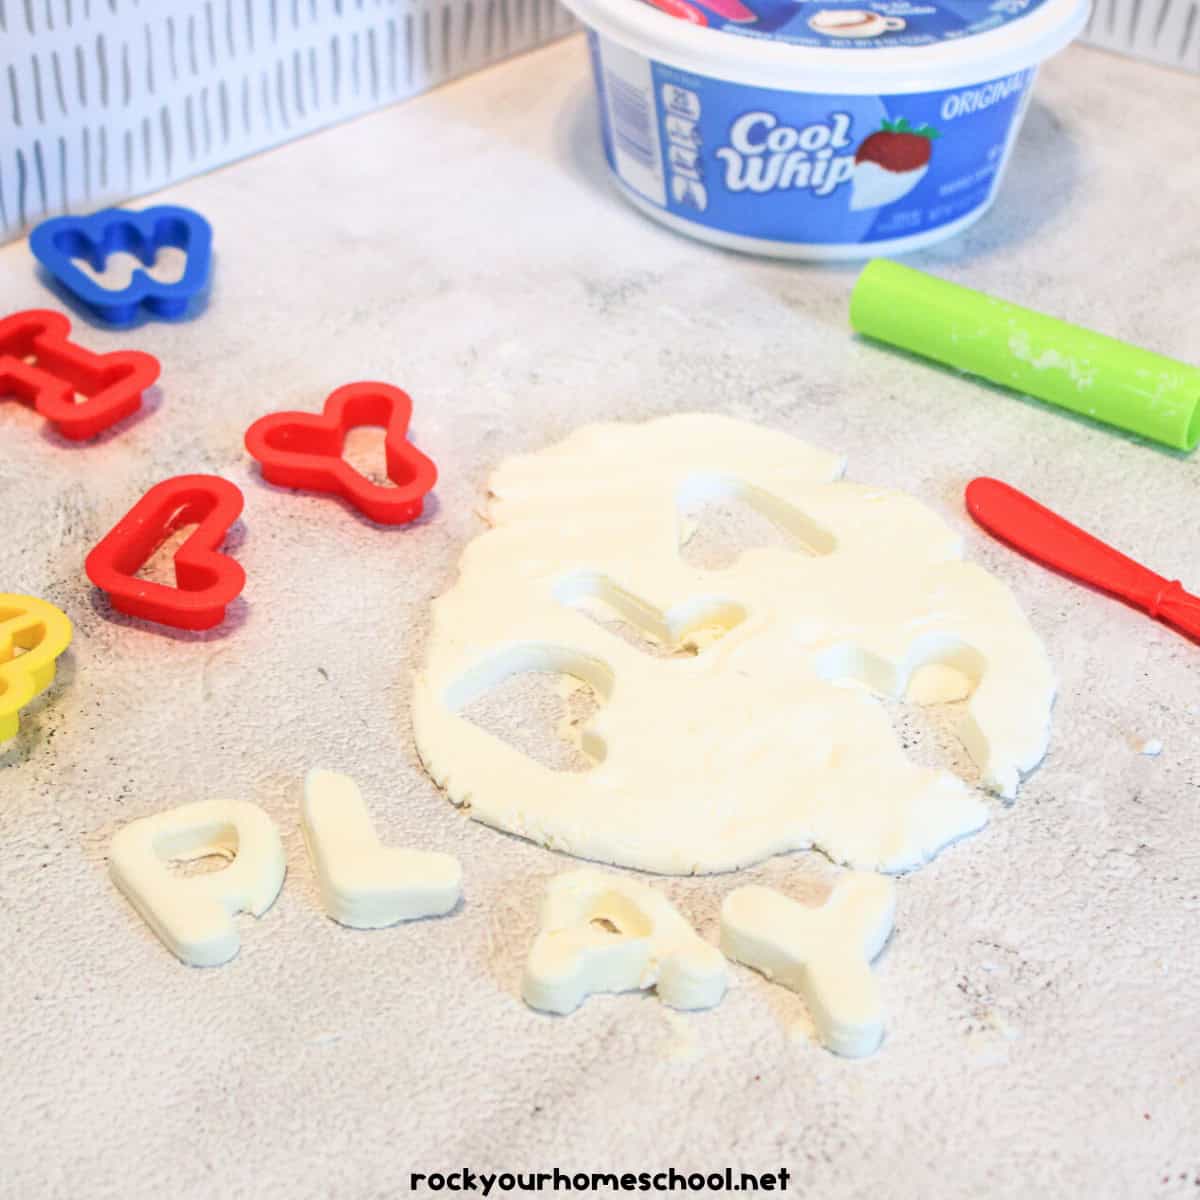 Cool Whip Playdough: How to Make and Enjoy with Kids